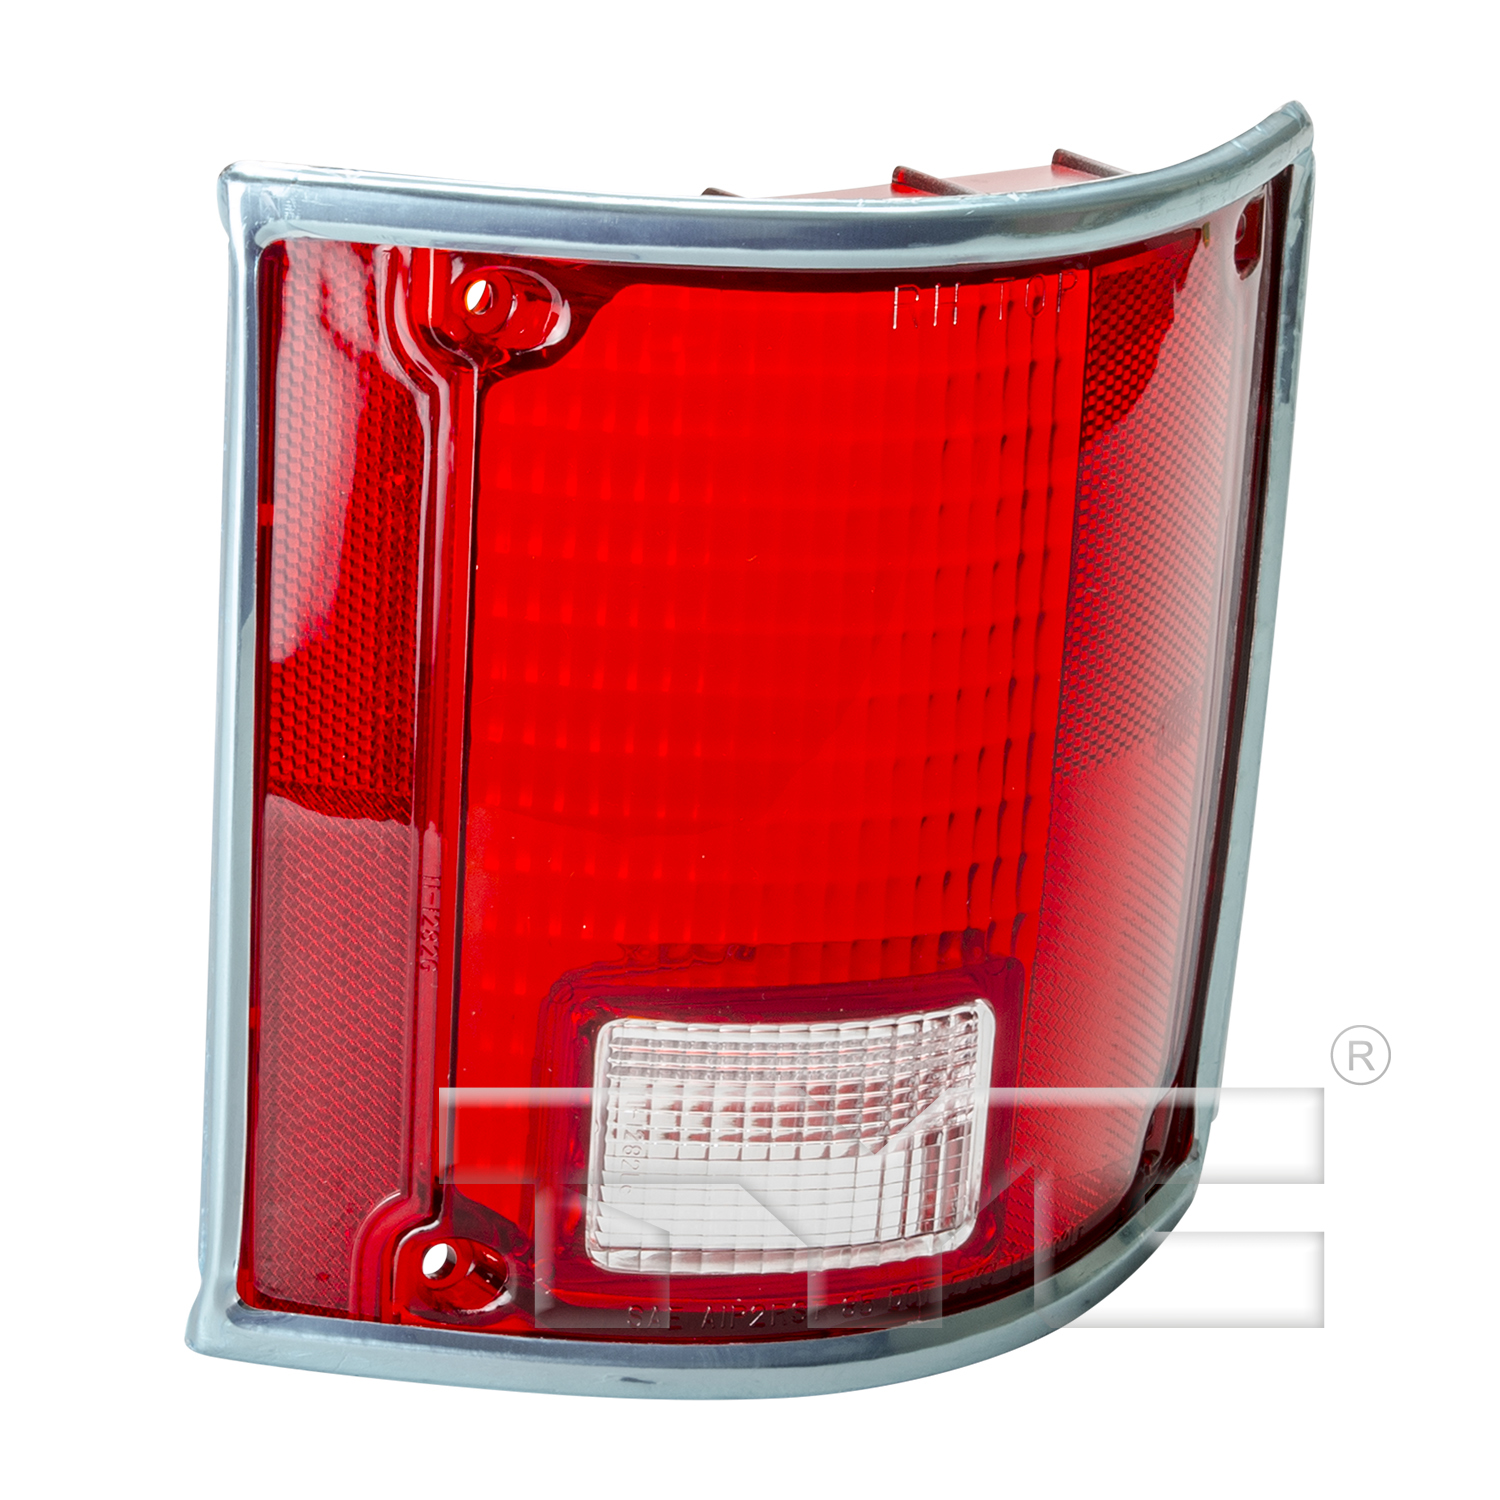 Aftermarket TAILLIGHTS for GMC - C15, C15,75-78,RT Taillamp lens